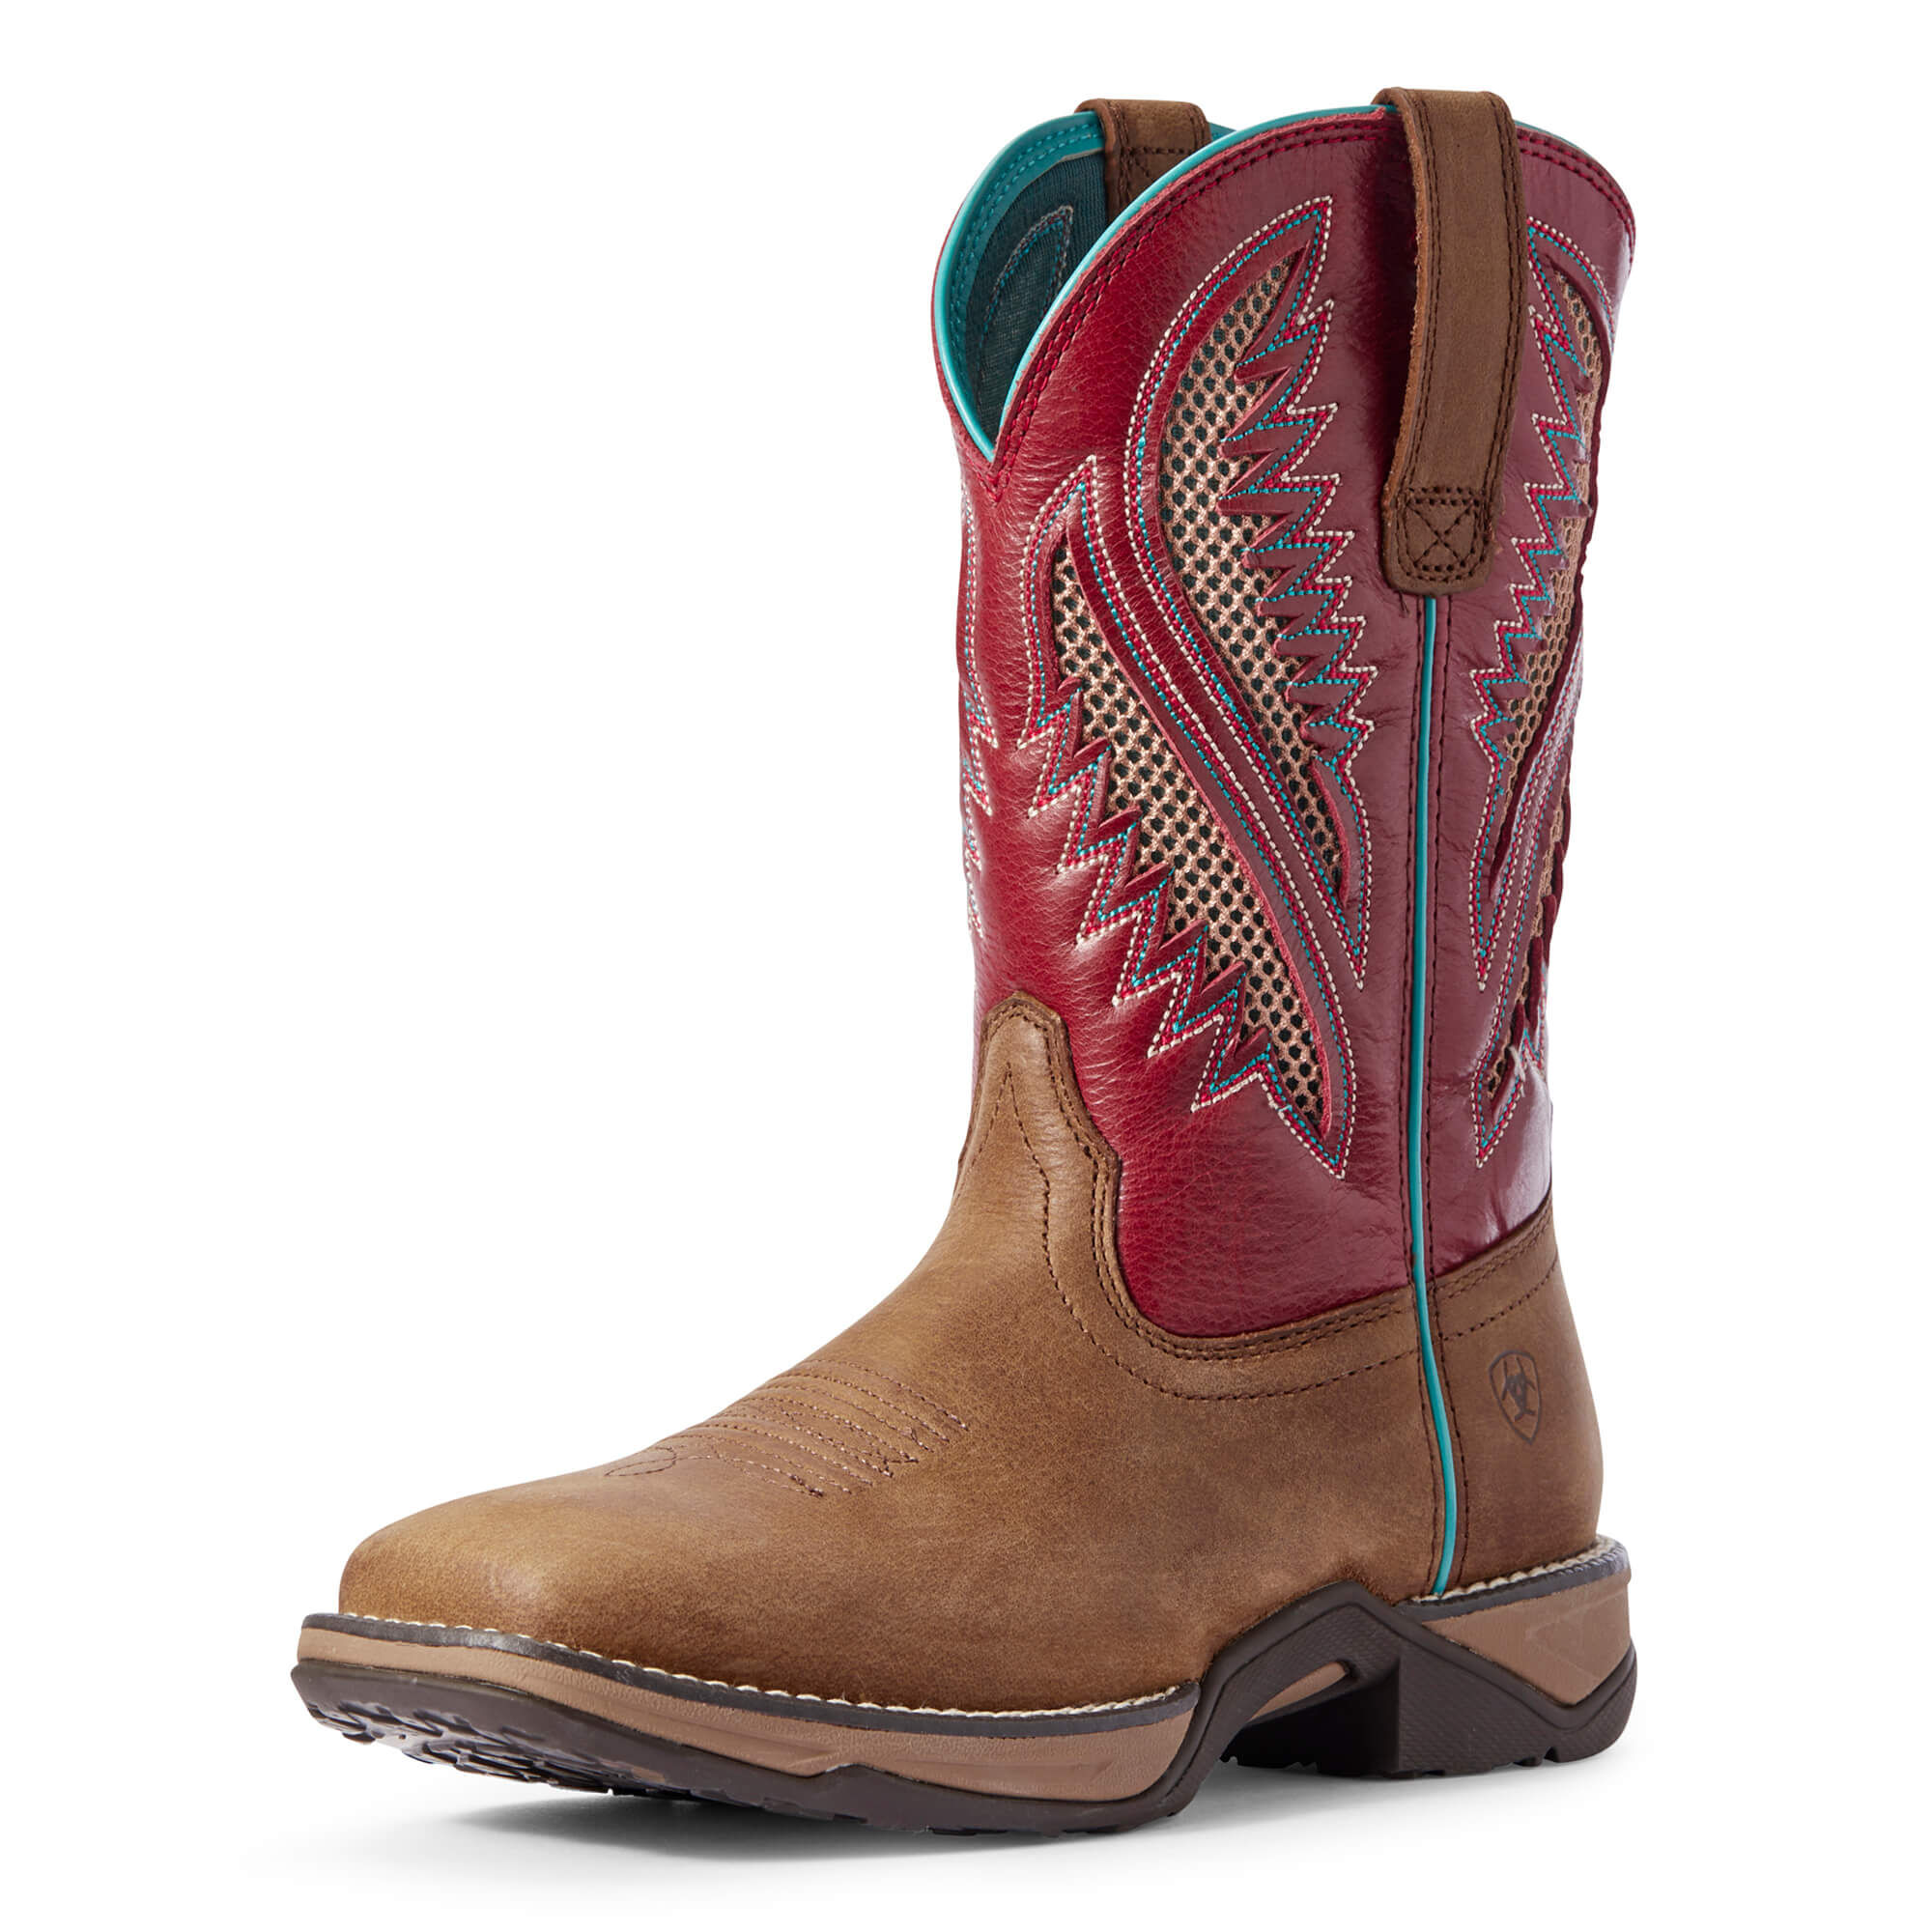 red diamond boots cost \u003e Up to 61% OFF 